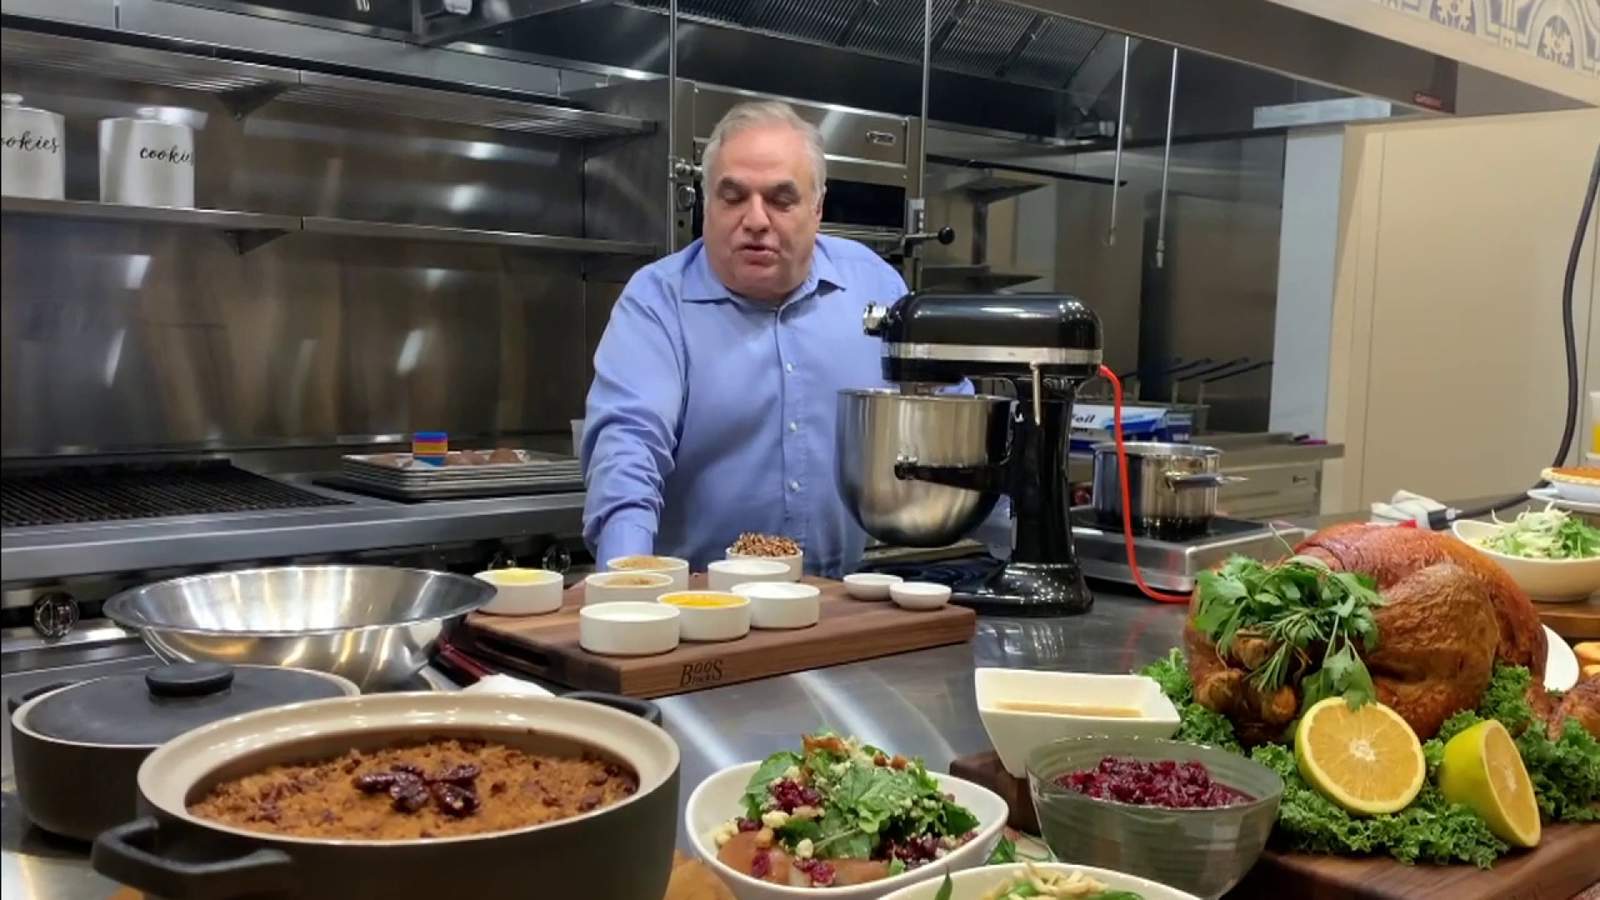 Founder of South Beach Wine and Food Festival offering Thanksgiving feast, with all proceeds helping local hospitality workers